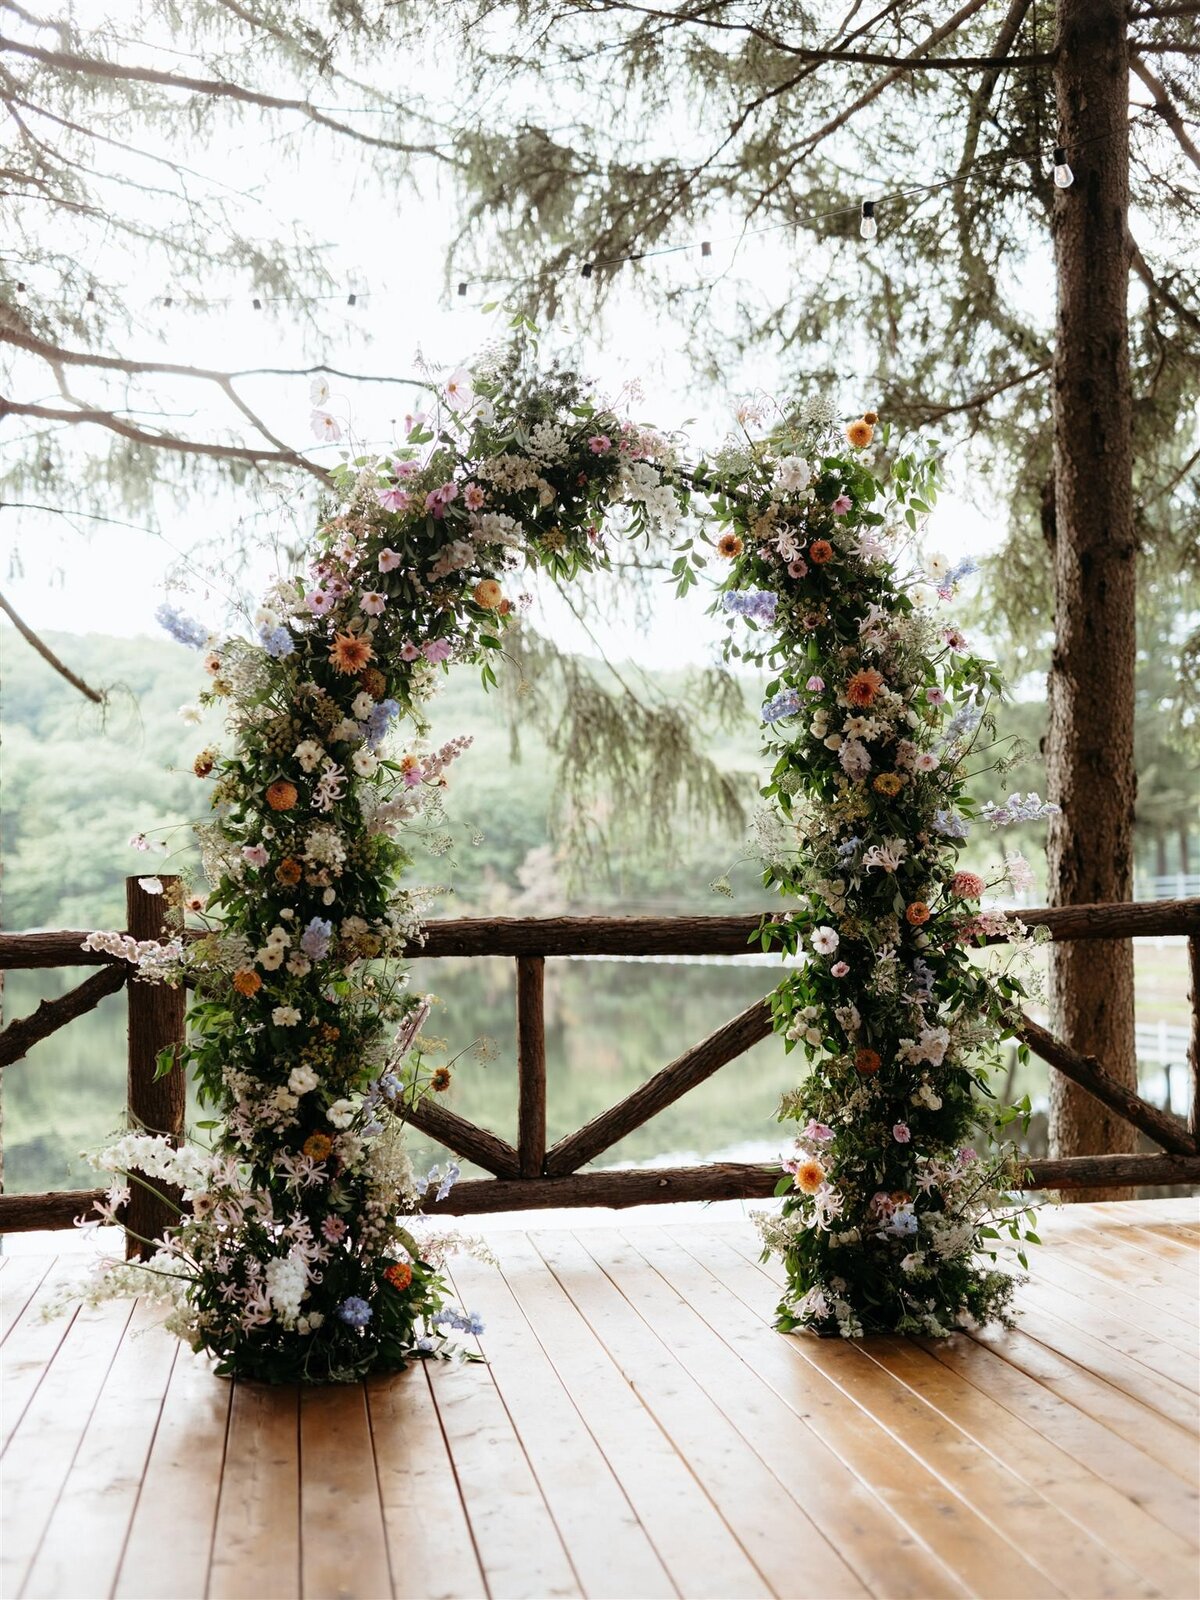 Stunning floral arbor by Canvas Weddings sits on wooden dock overlooking lake and trees at Cedar Lakes Estate wedding venue in Catskills